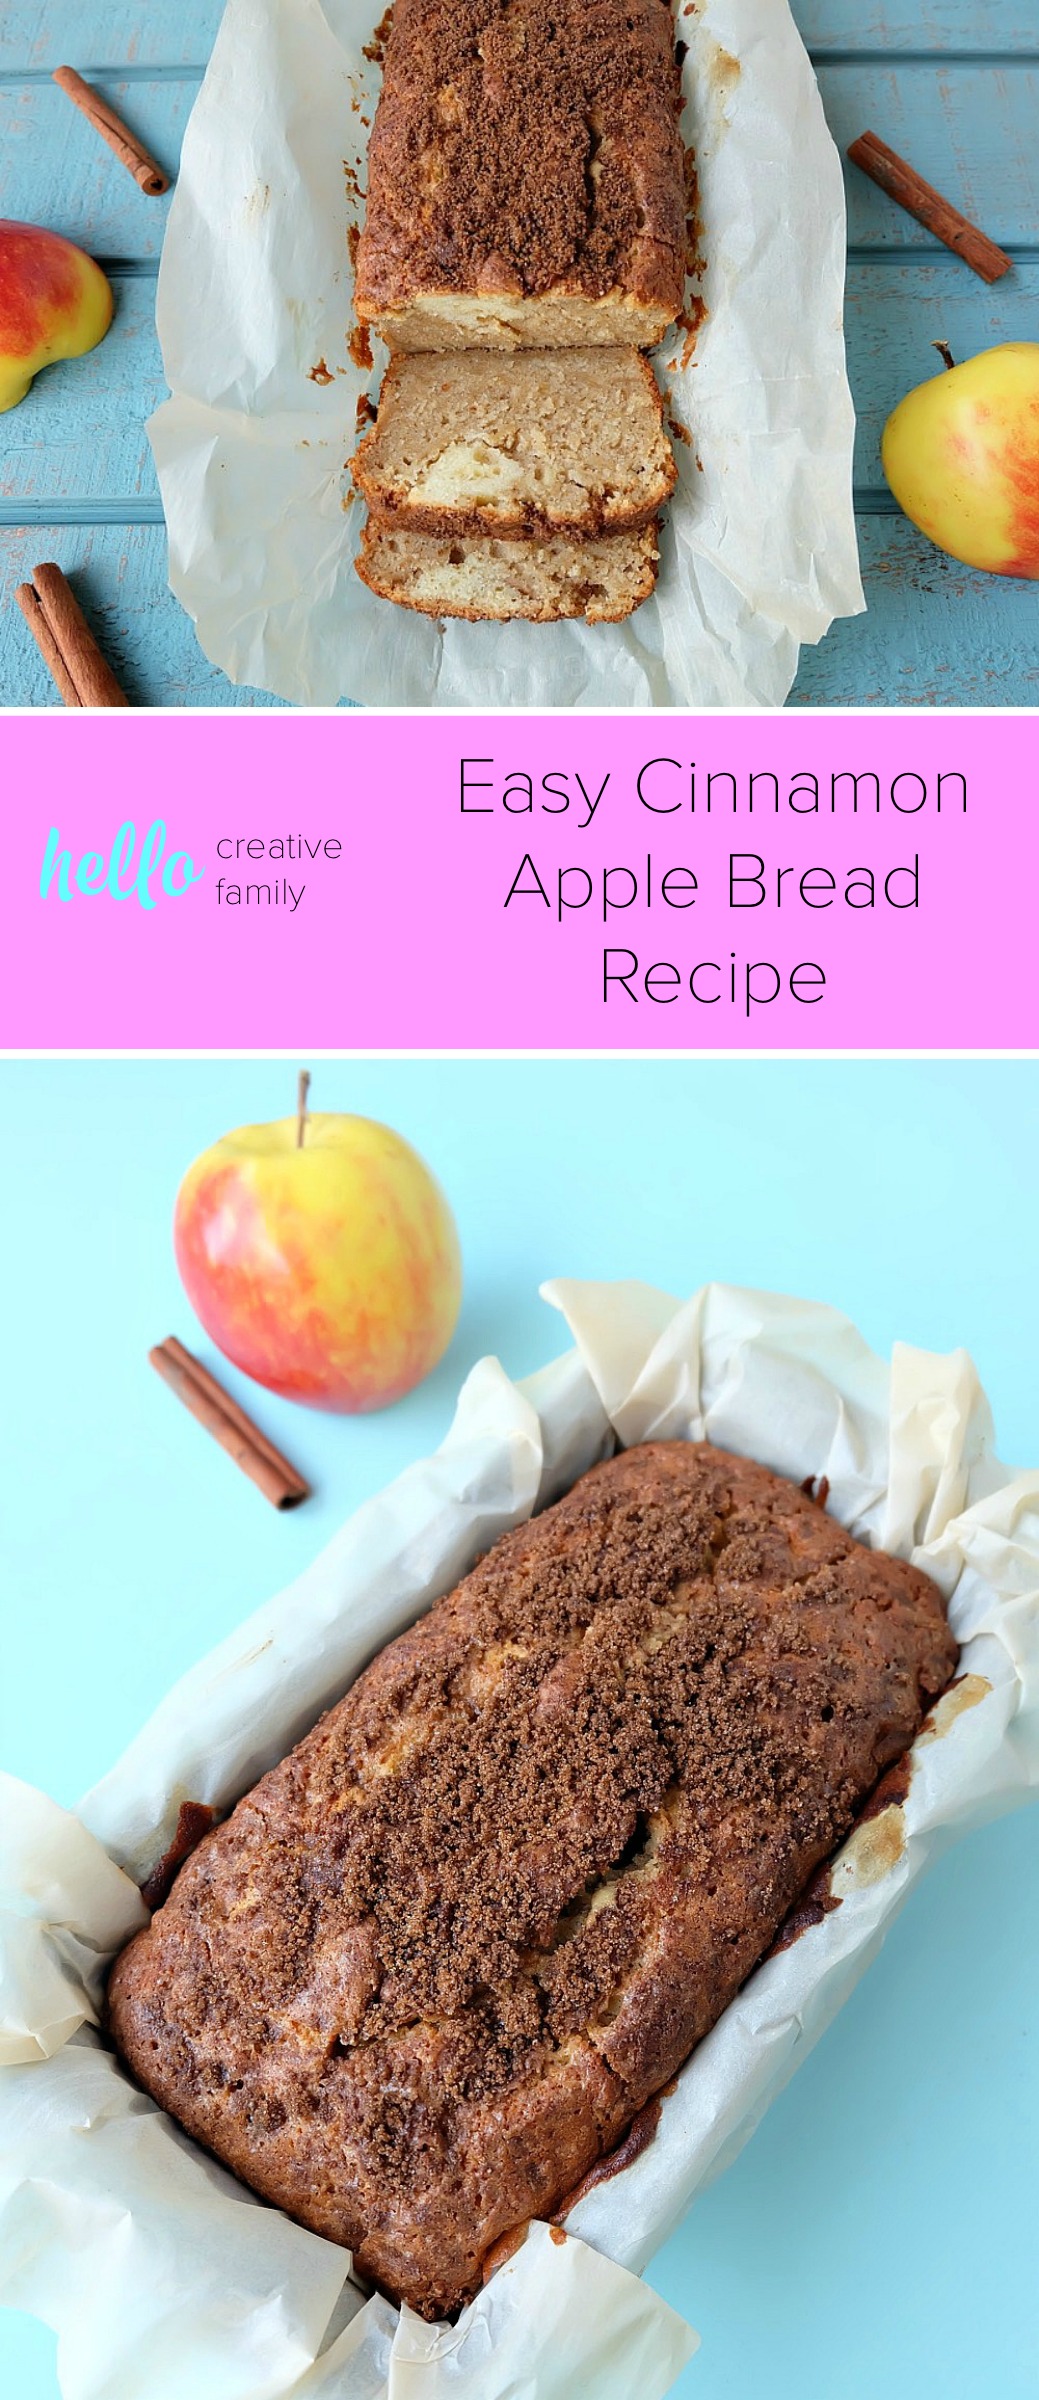 This easy cinnamon apple bread recipe is a family favorite that is perfect for breakfast or to serve for afternoon tea! Kid friendly, the apples melt right into the bread. Topped with a crunchy cinnamon and brown sugar topping. Easy to make with just 10 minutes of prep time, you're going to love baking this apple recipe! #Baking #Bread #Apples #Recipe